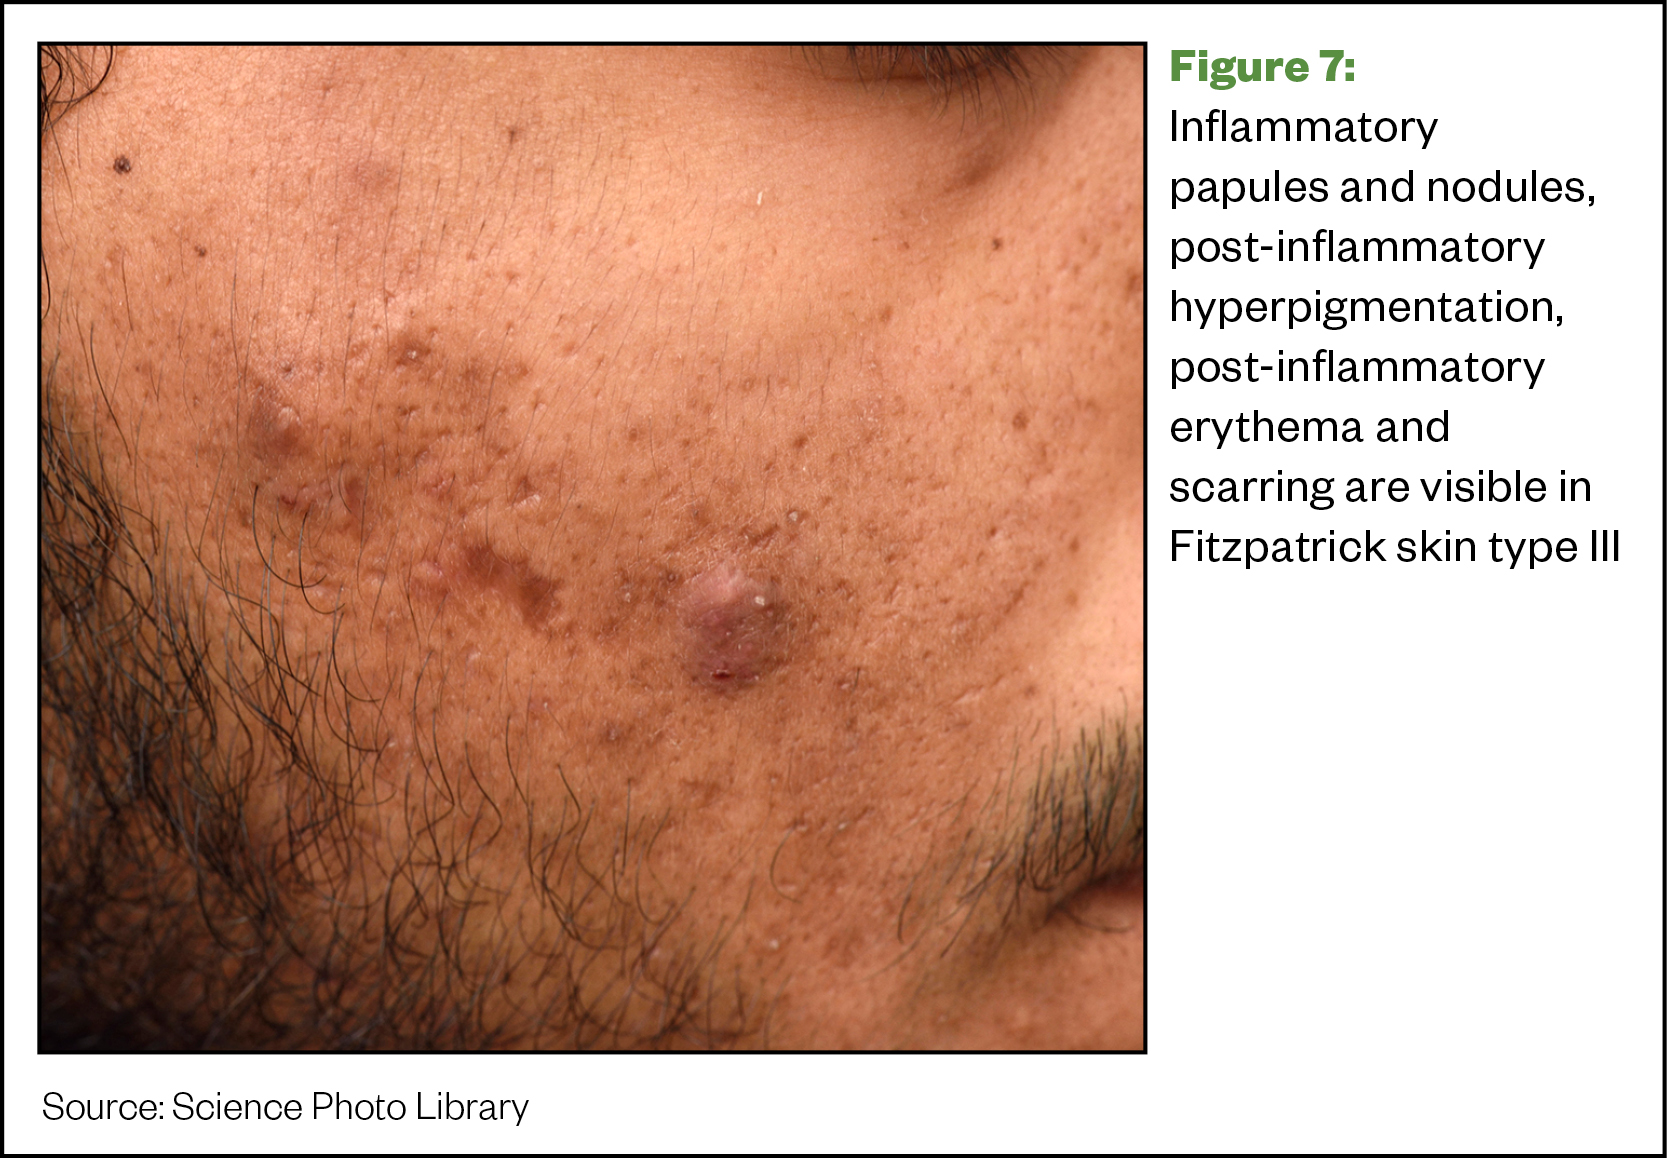 Inflammatory papules and nodules, post-inflammatory hyperpigmentation, post-inflammatory erythema and scarring 